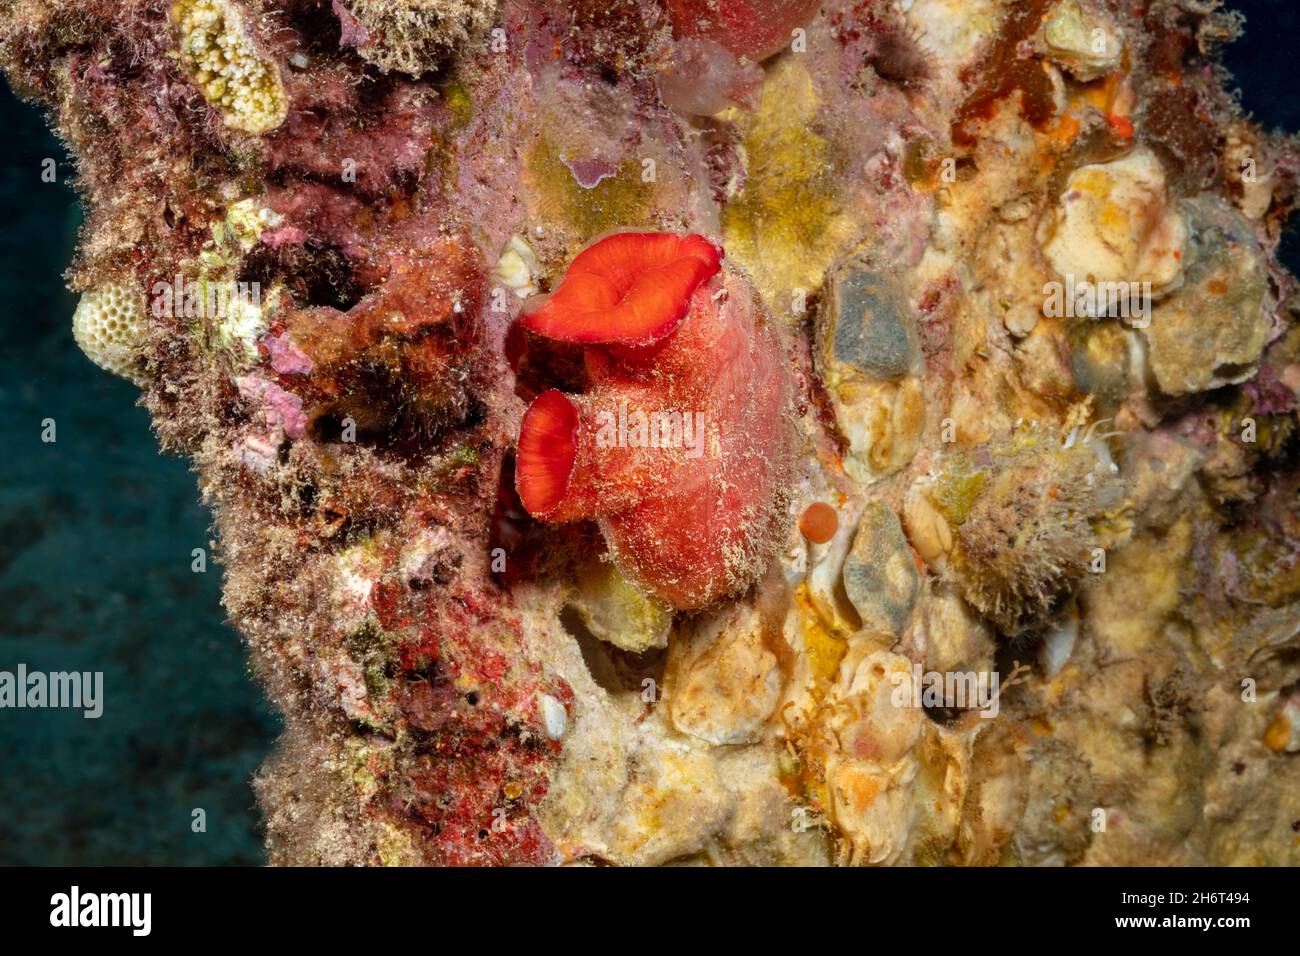 Herdman's tunicate or sea squirt, Herdmania momus, is also referred to as the red throated ascidian, Hawaii. This introduced species likely arrived to Stock Photo